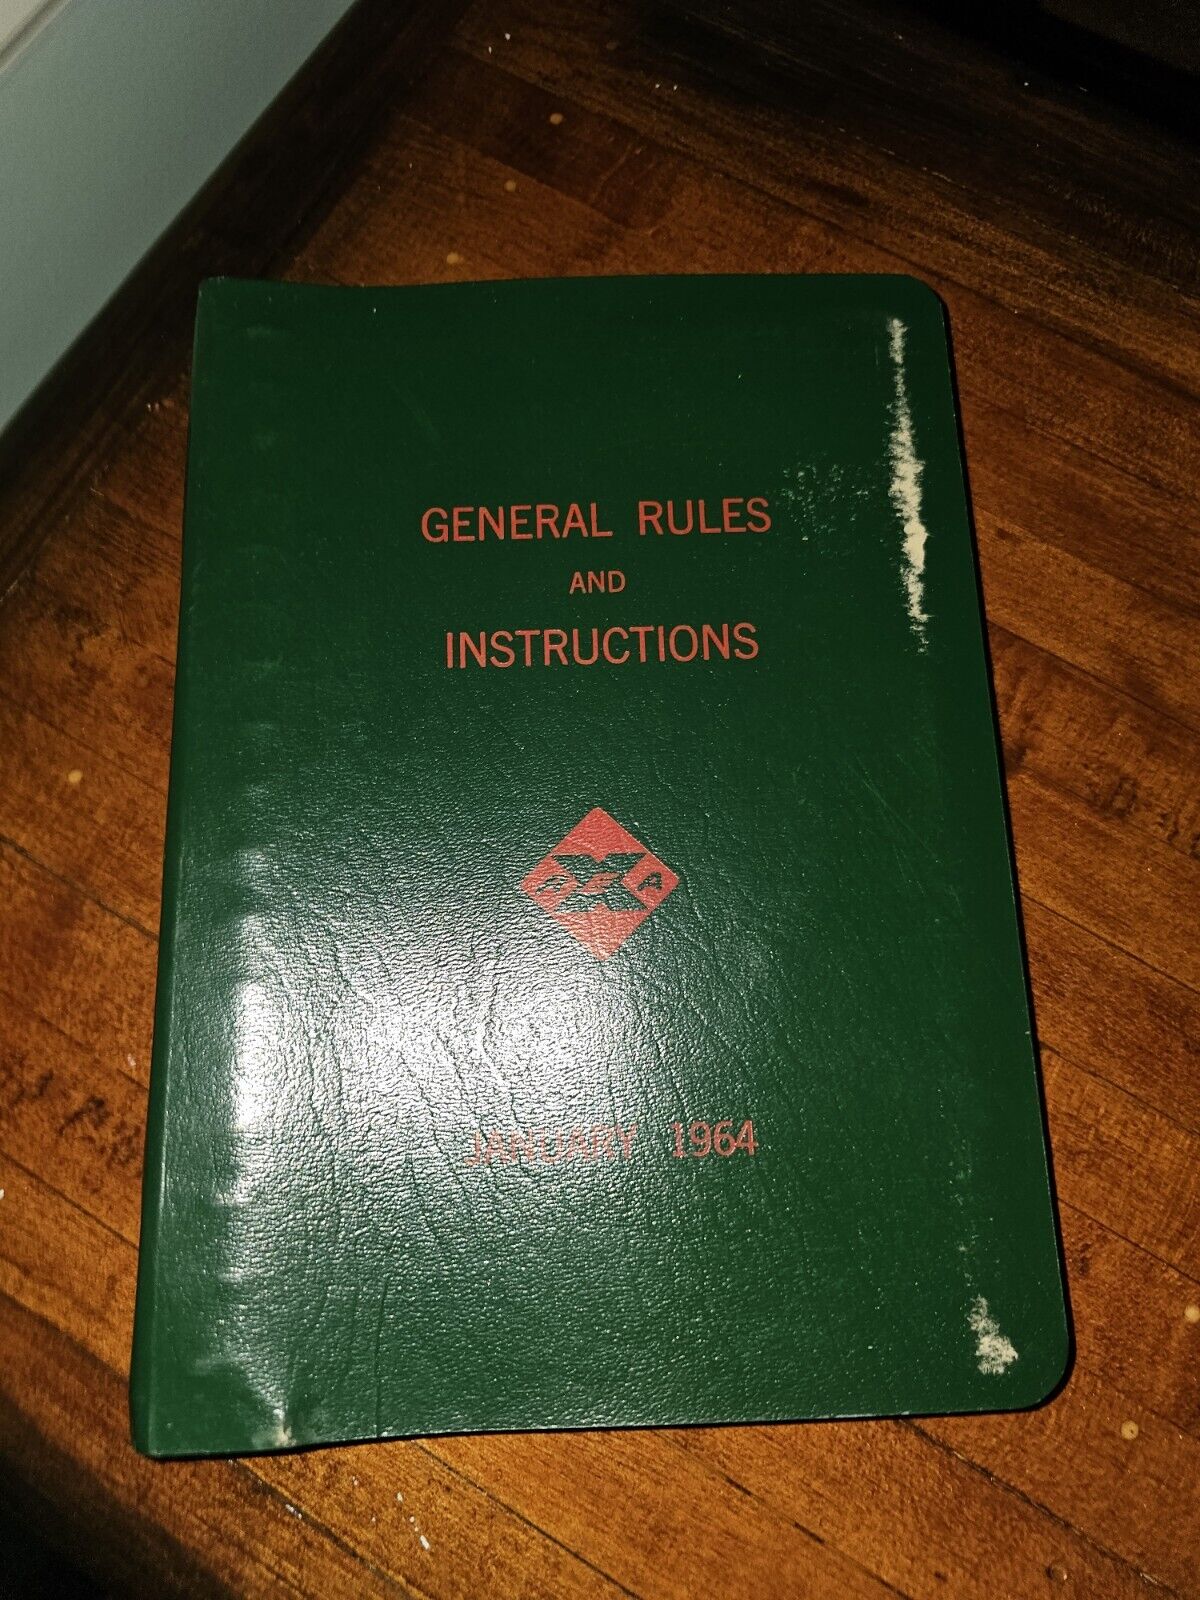 January 1964 Railway Express Agency General Rules And Instructions Train Book